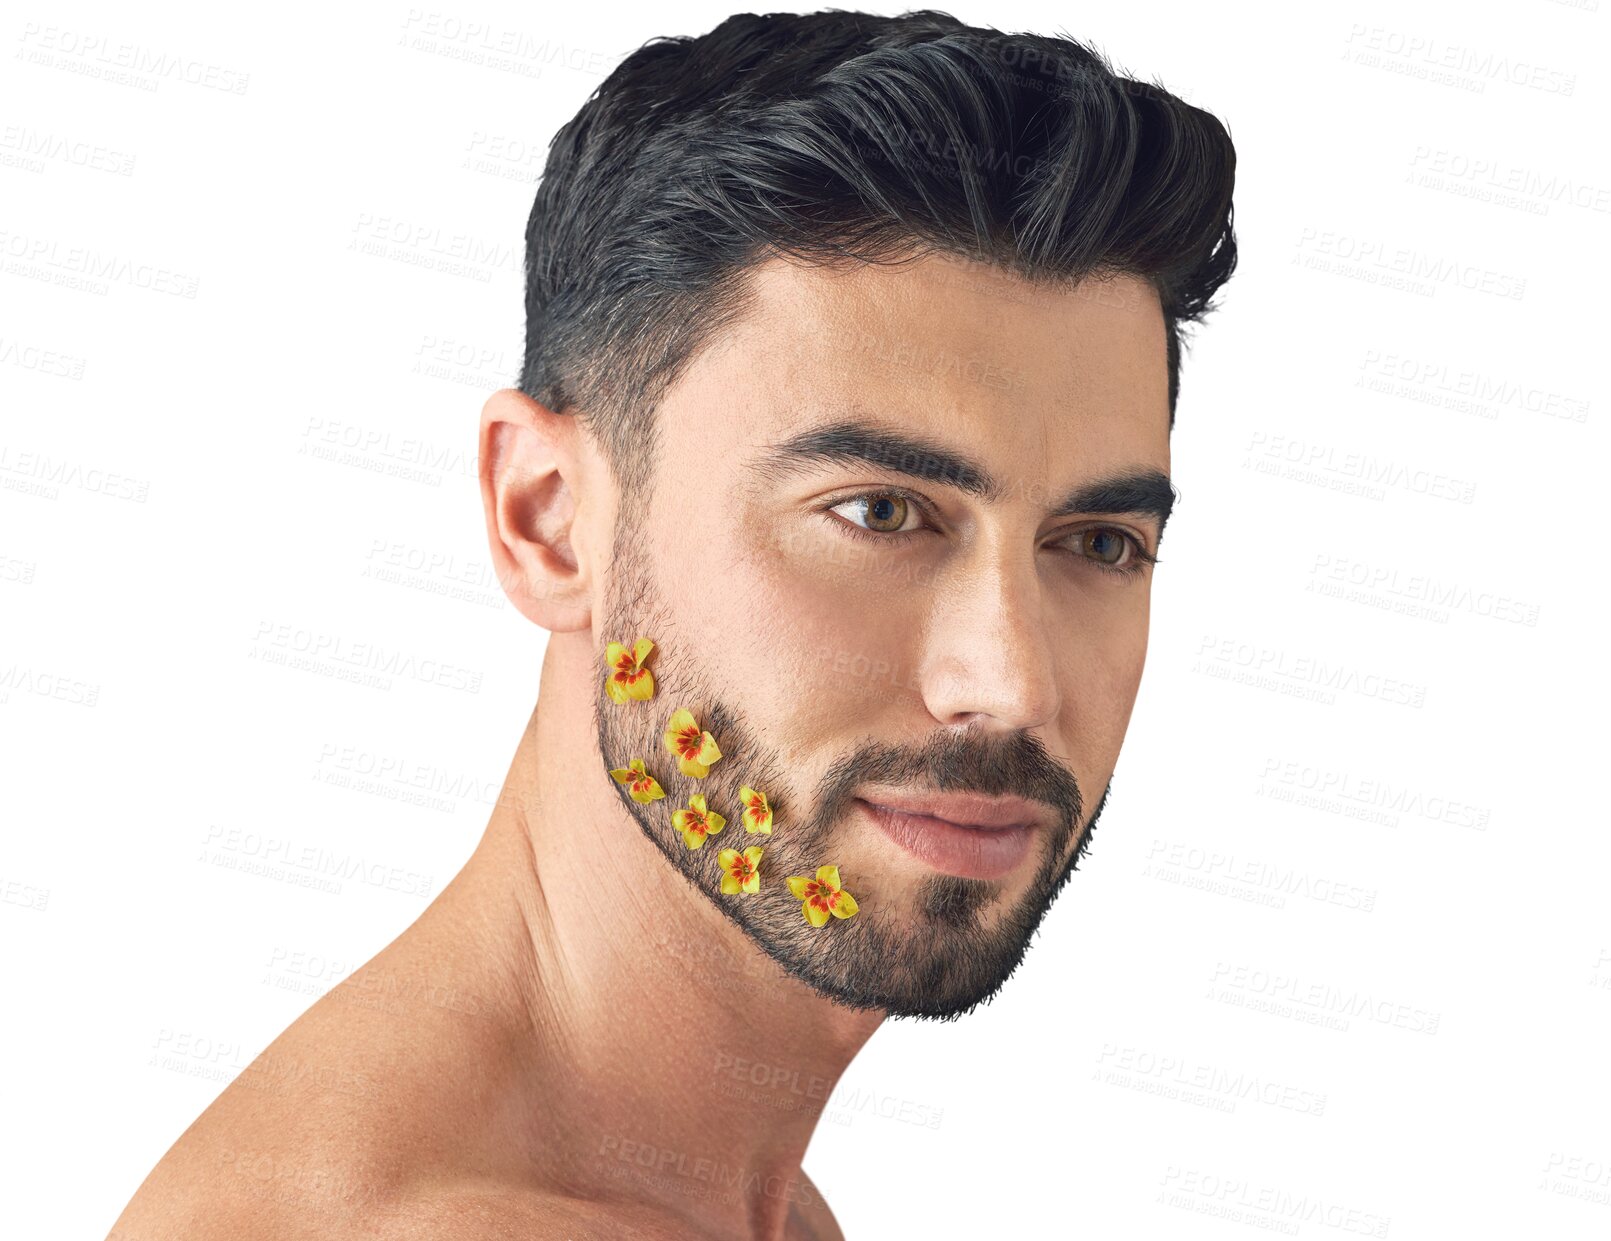 Buy stock photo Flowers, skincare or man with beauty, beard or confidence isolated on transparent png background. Dermatology face transformation, wonder or person thinking of facial glow, wellness or floral plants